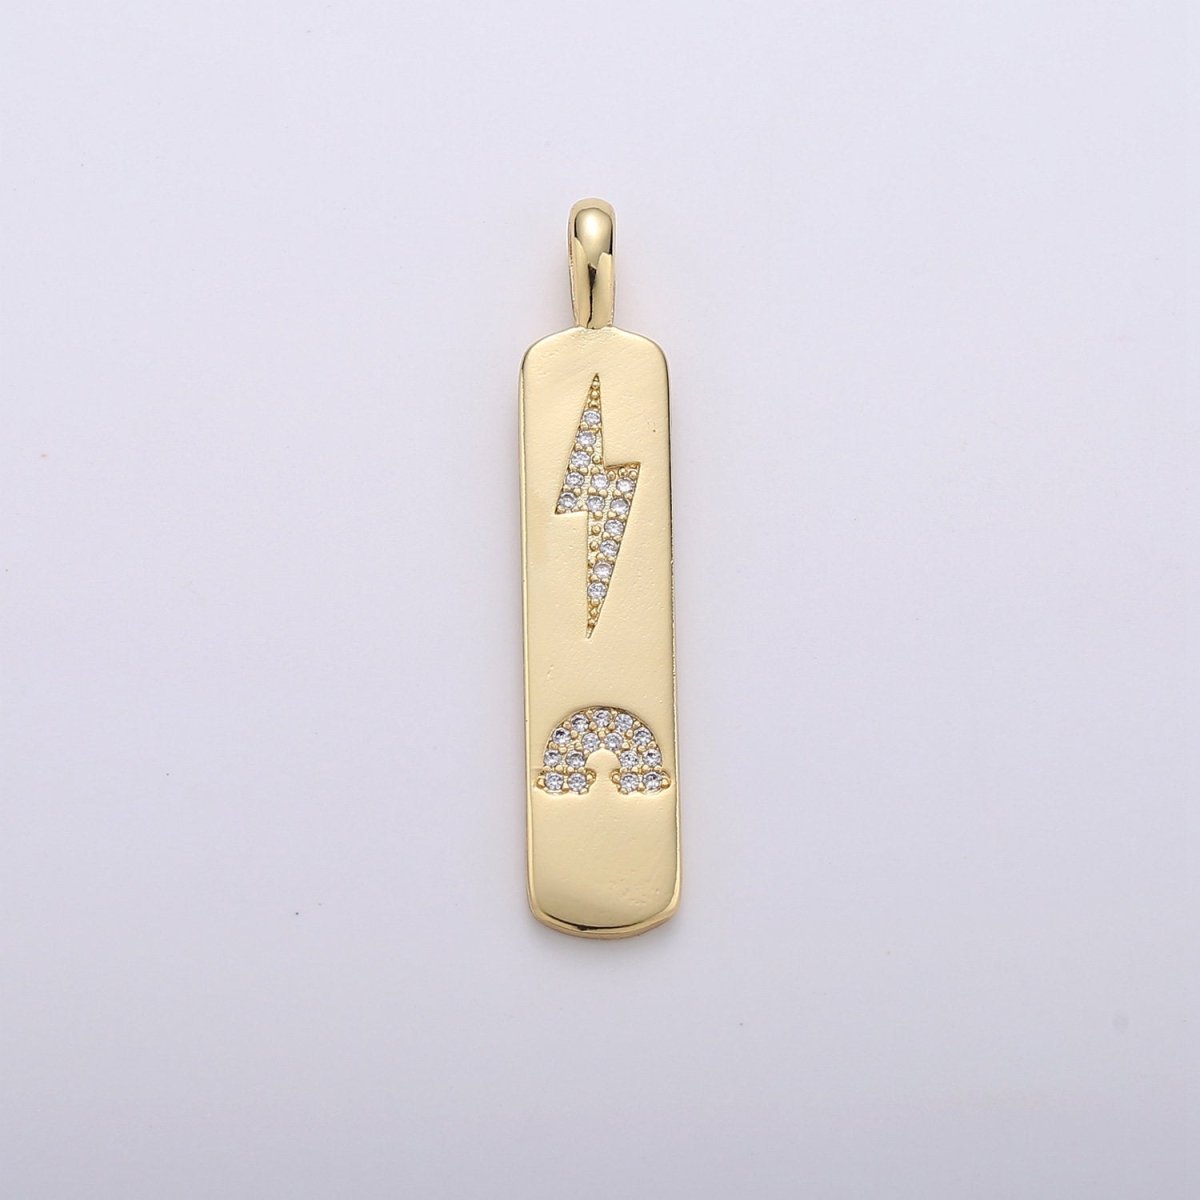 Micro Pave Bolt Charm Rectangle Tag in 14k Gold Filled Drop Pendant Long Celstial Charm for Necklace Component I-705 - DLUXCA